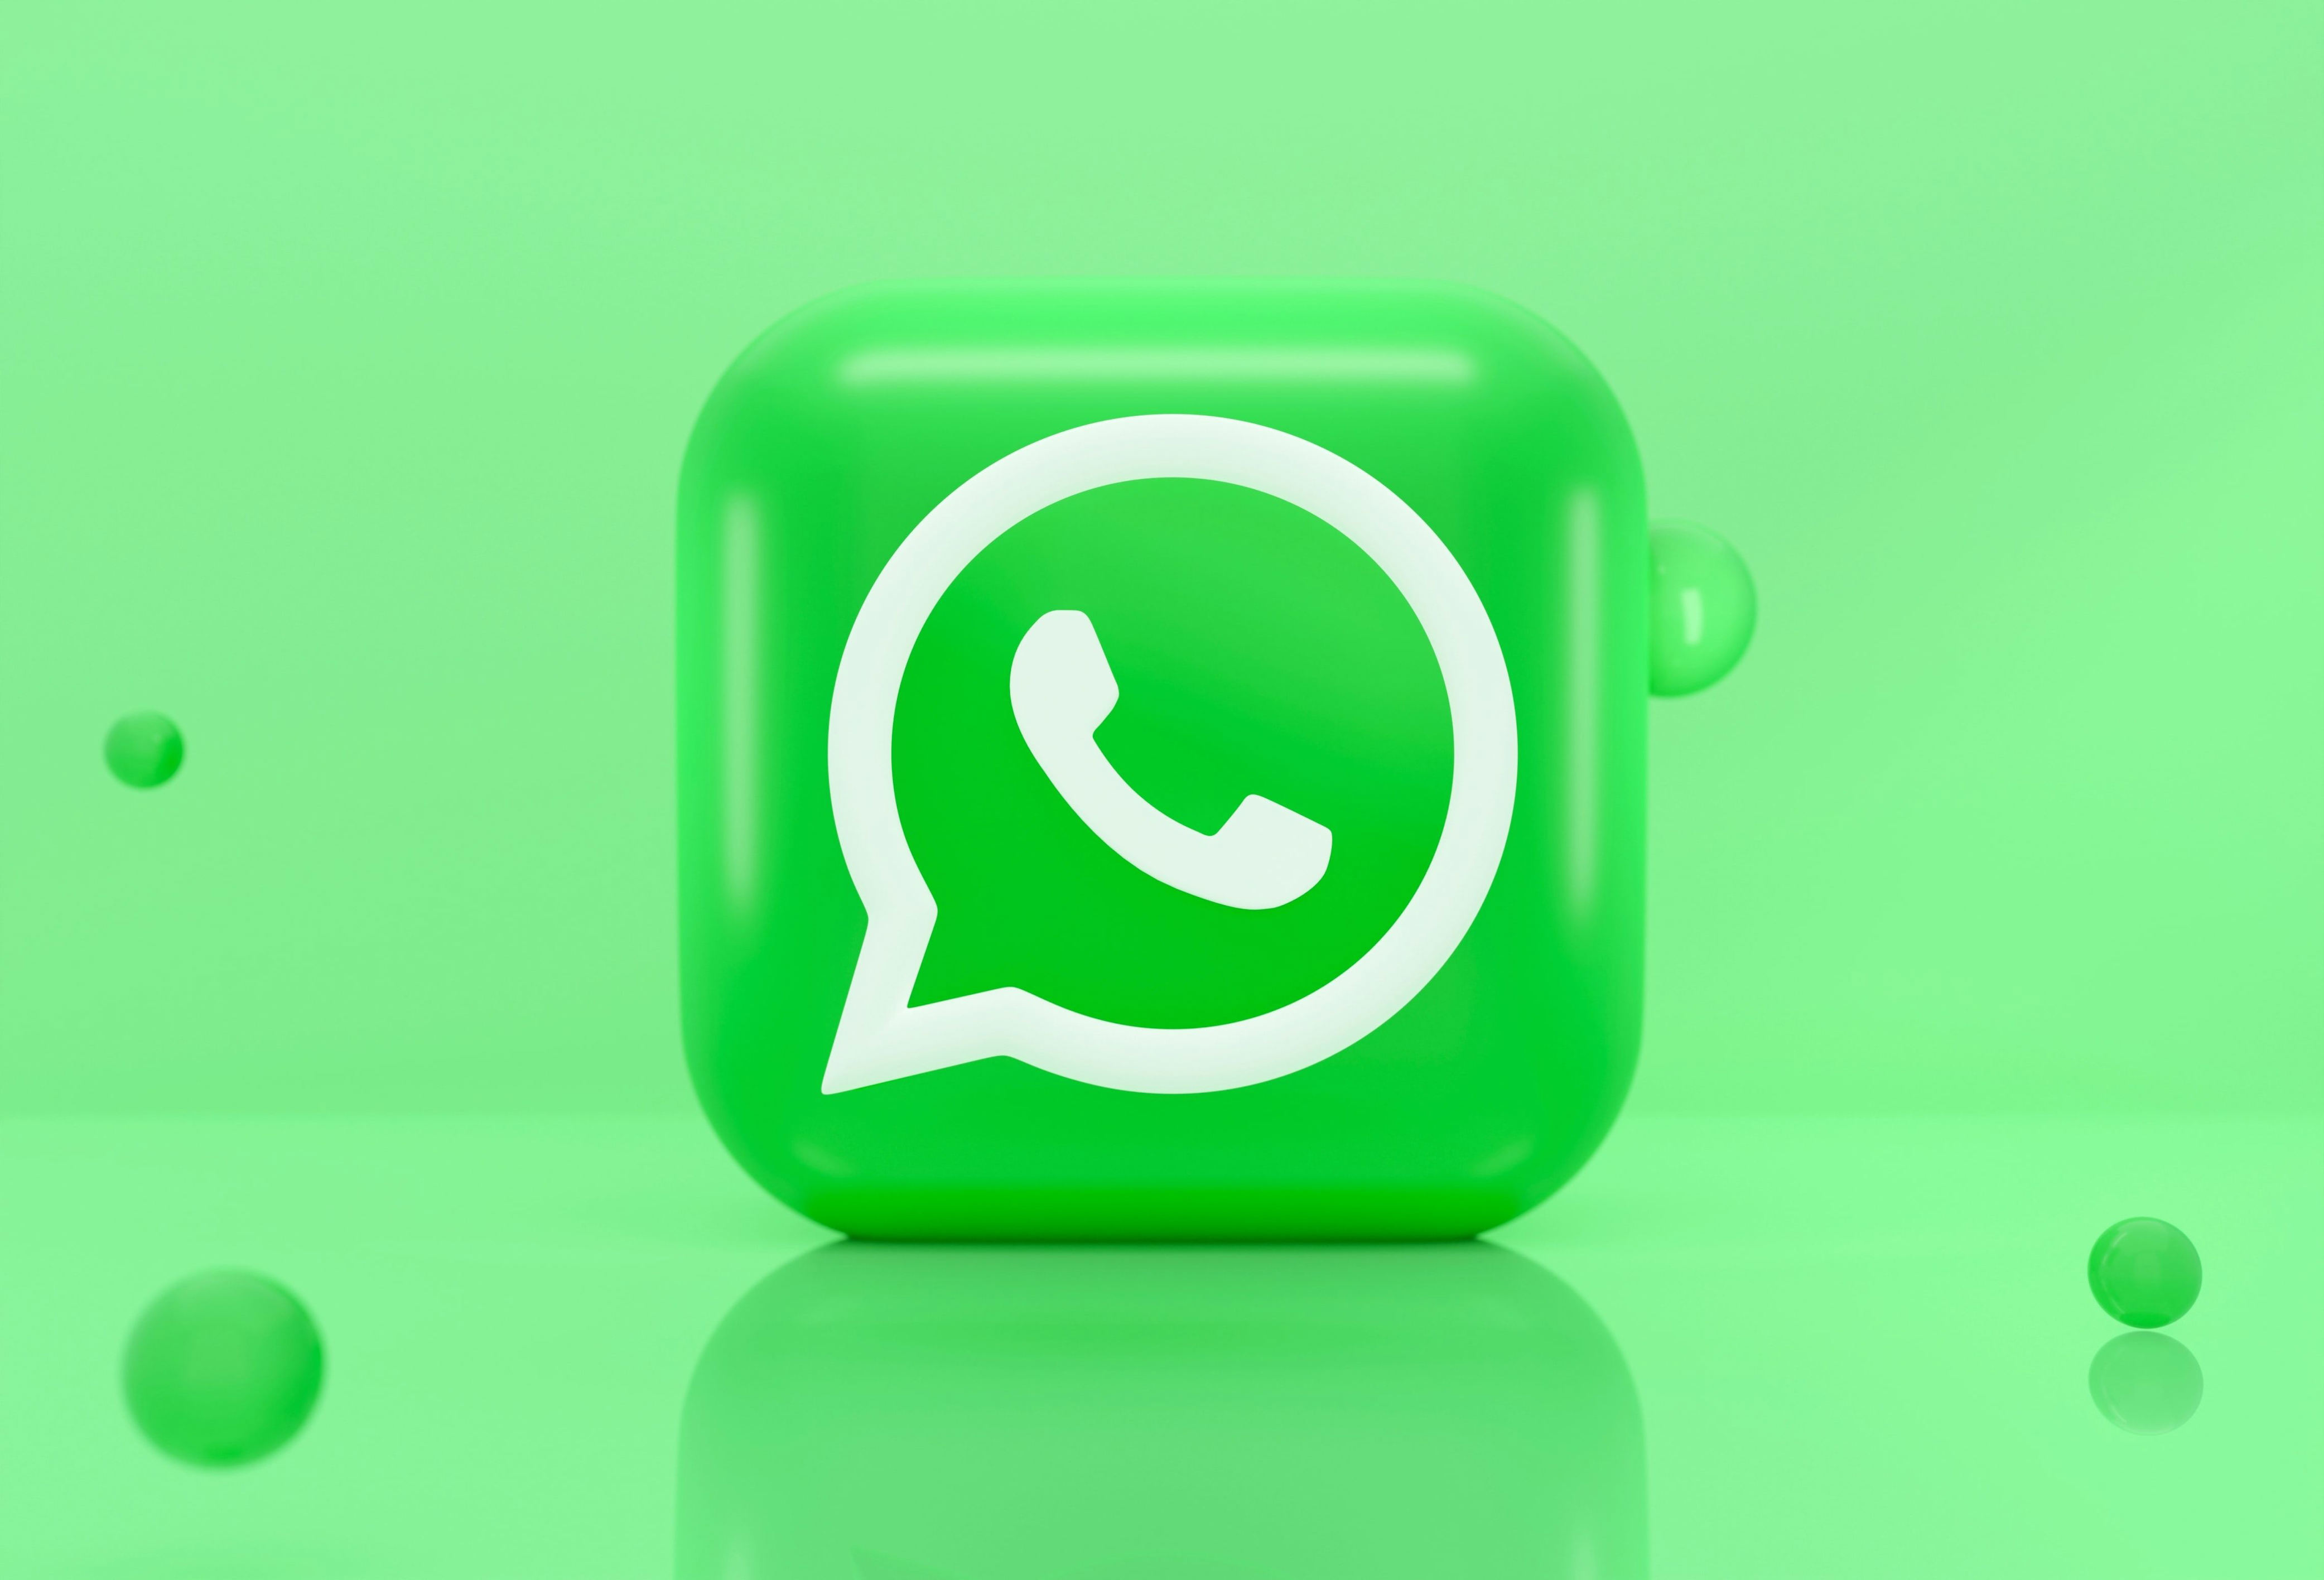  A 3D rendering of the WhatsApp logo with the query 'WhatsApp link customization thirdparty apps'.